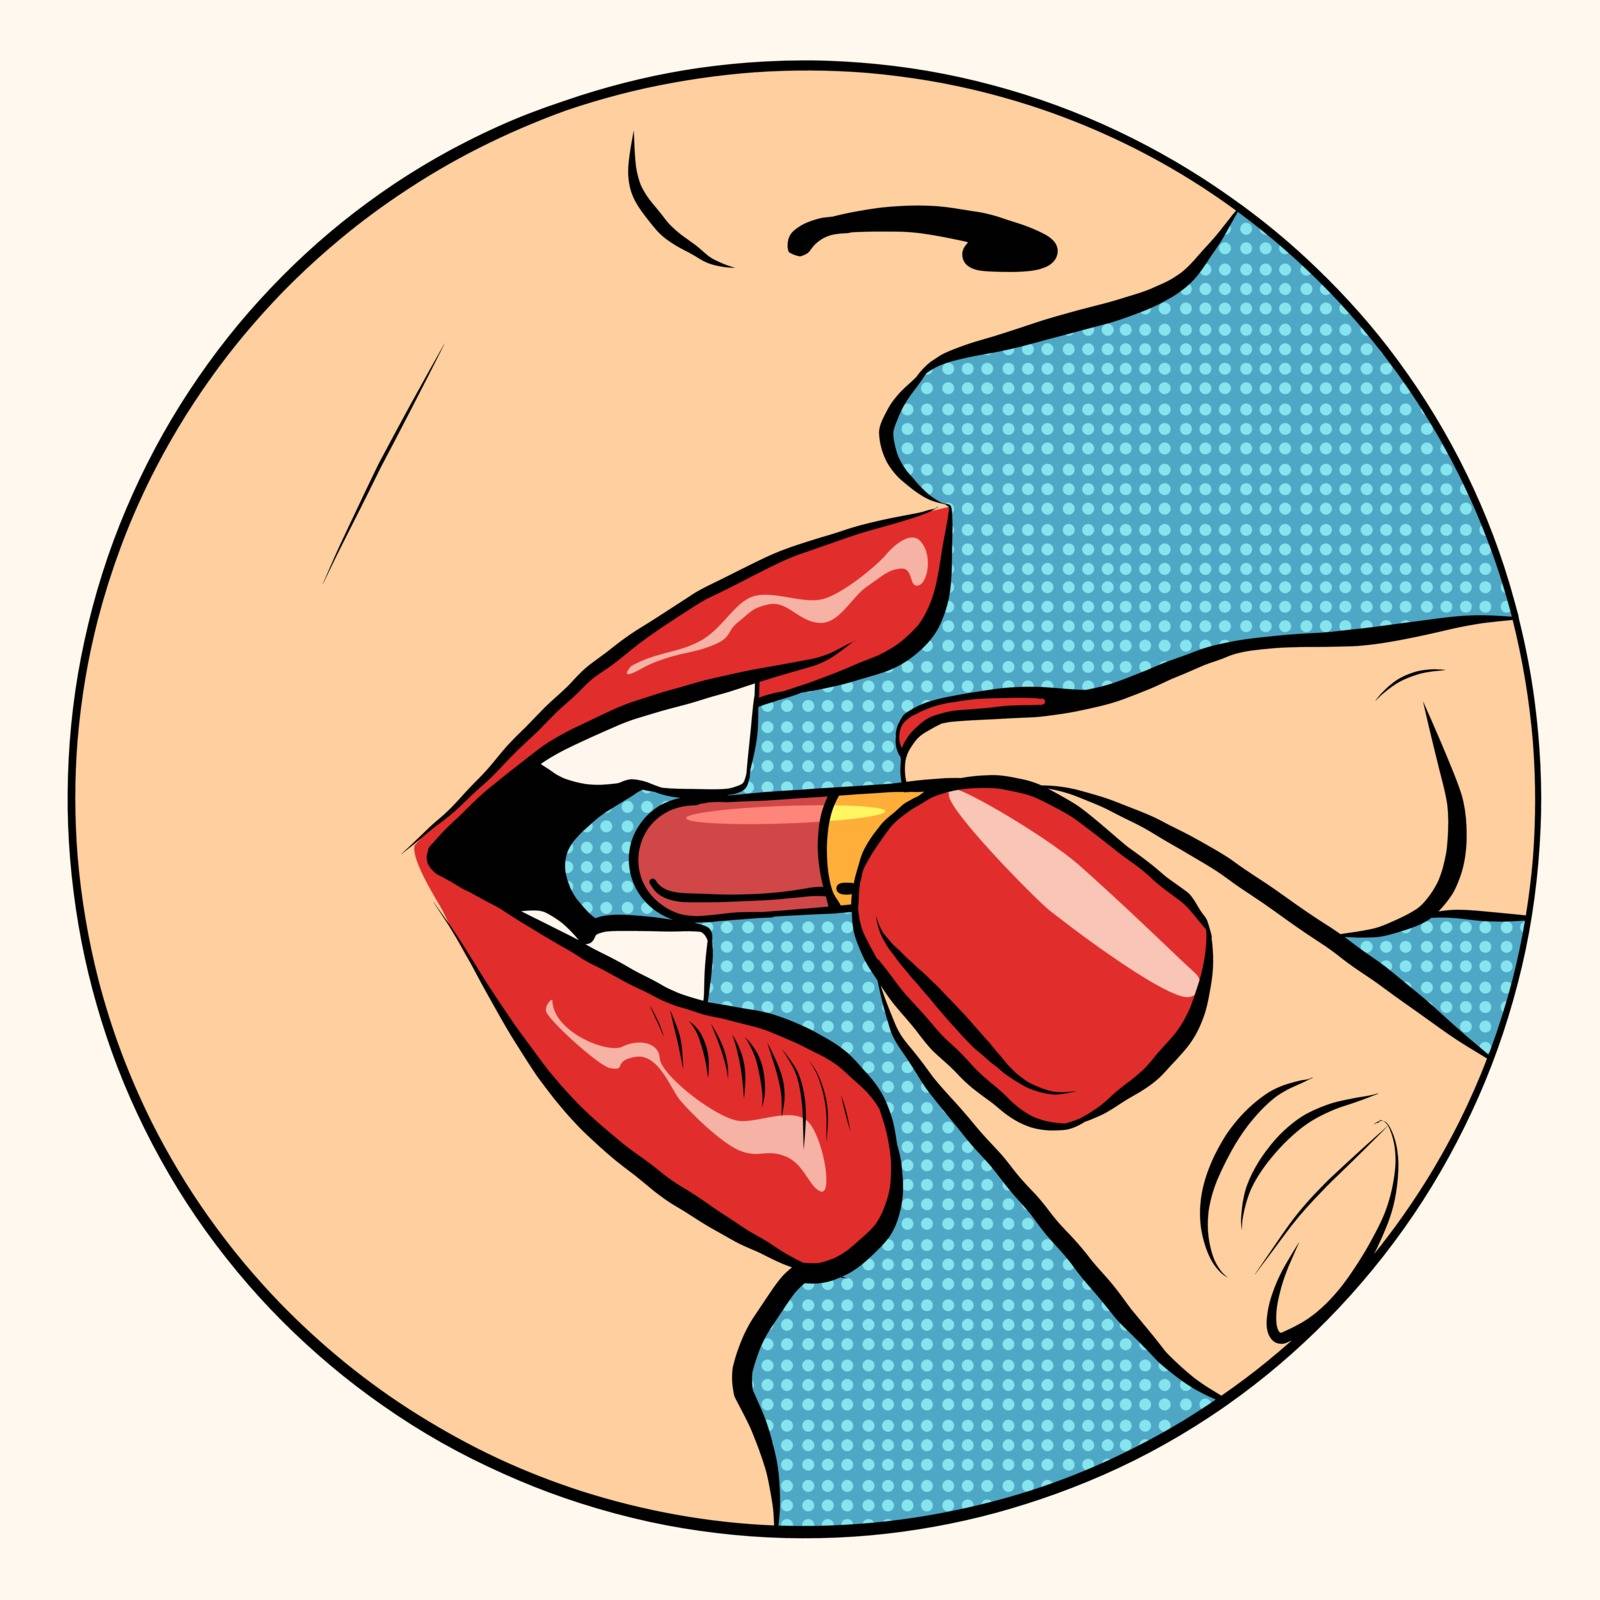 Taking the pill medication pop art retro style. A woman takes the pill. Medicine, pharmacology and health